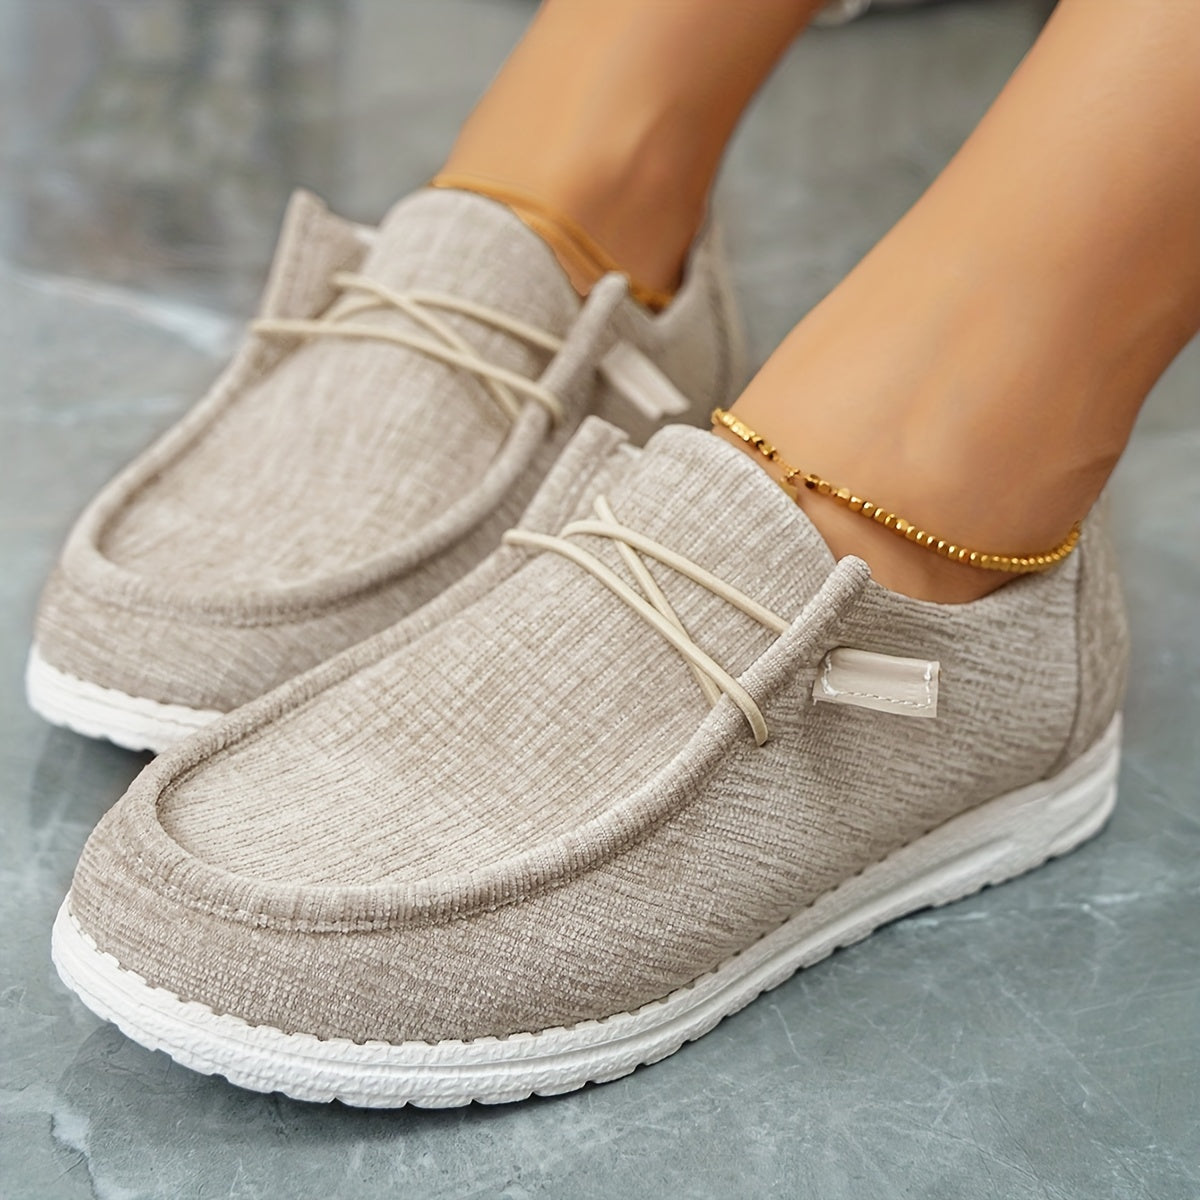 Women's Solid Color Canvas Shoes, Casual Lace Up Outdoor Shoes, Lightweight Low Top Sneakers